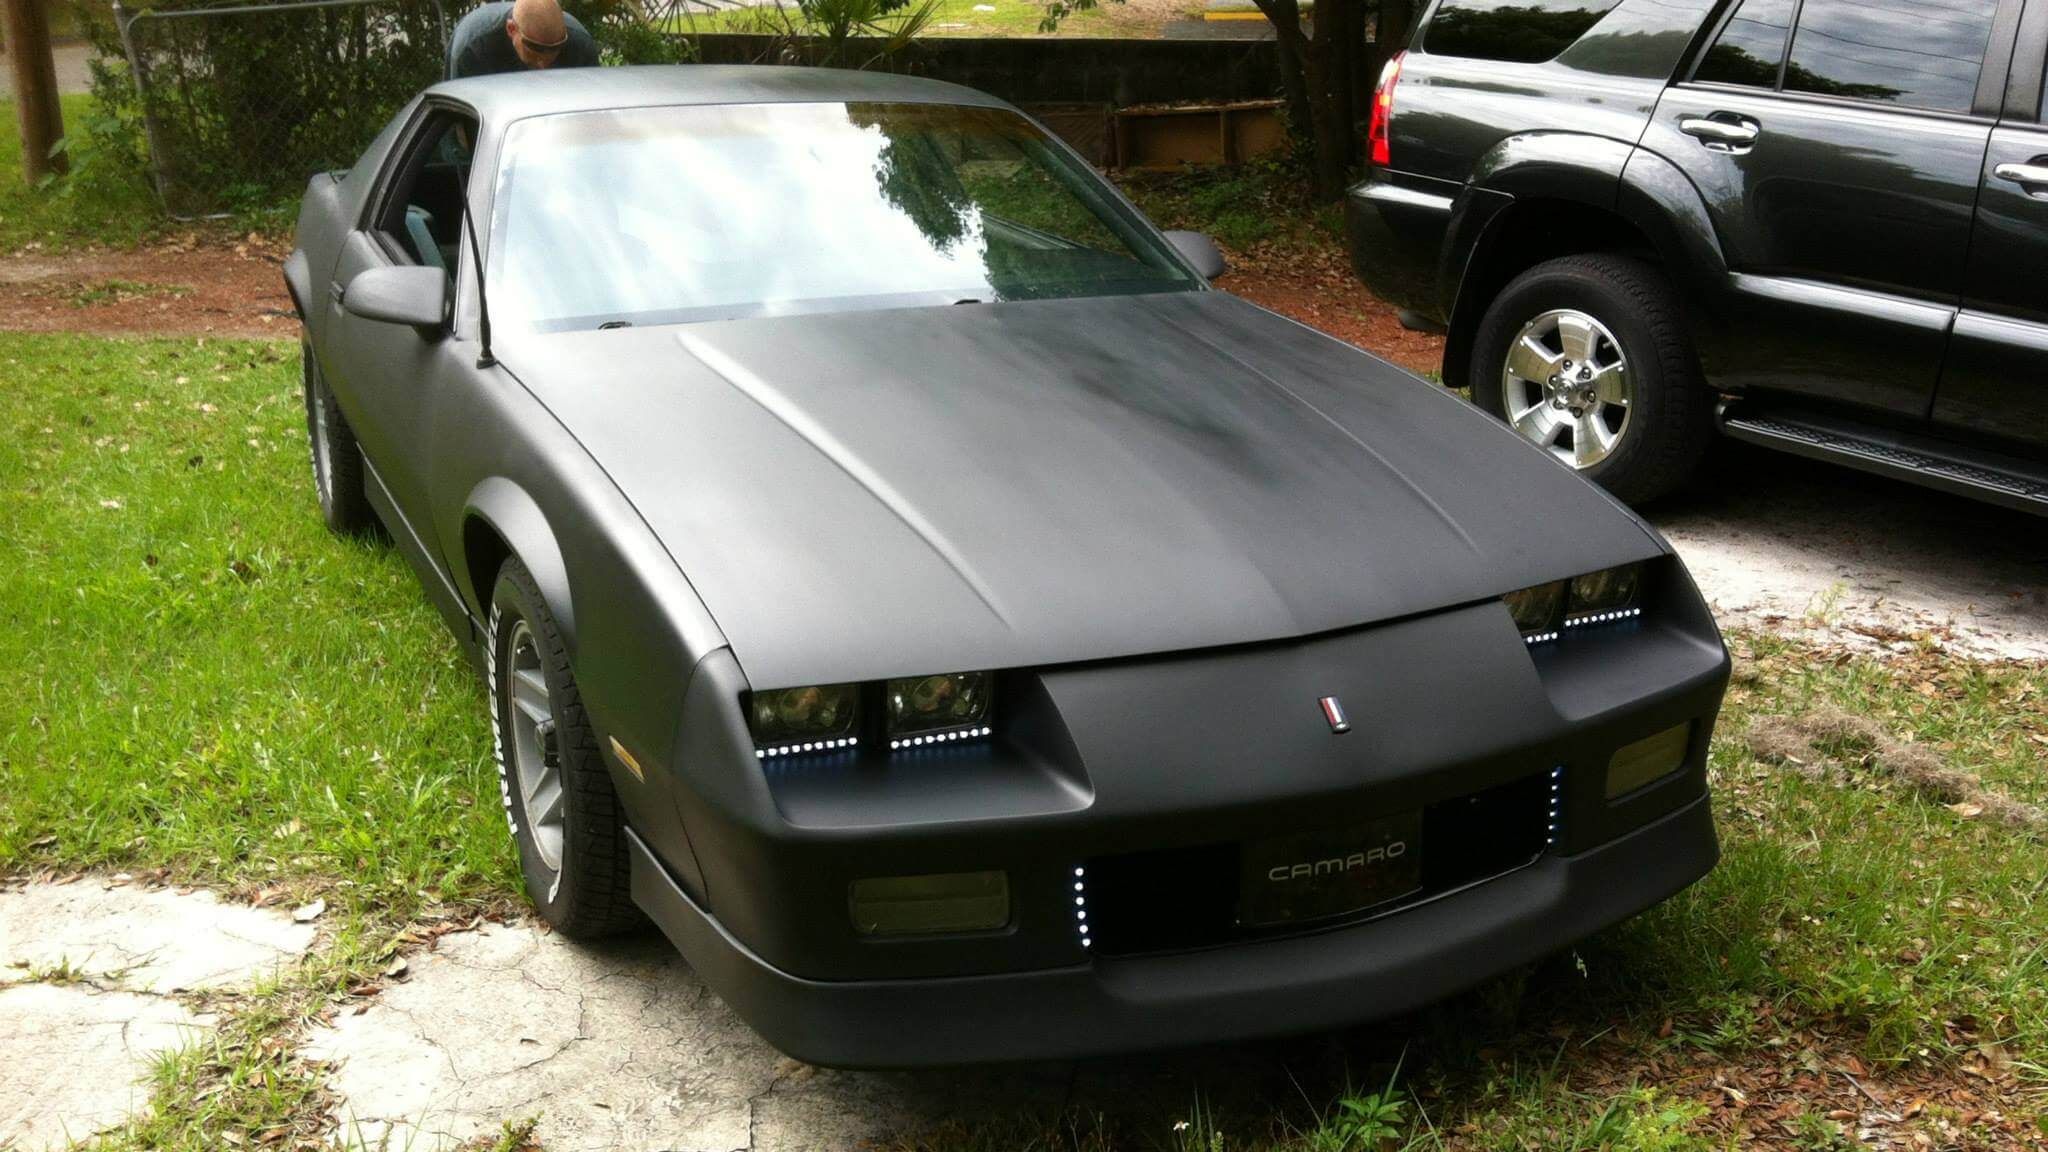 1989 Chevrolet Camaro: The iconic muscle car.